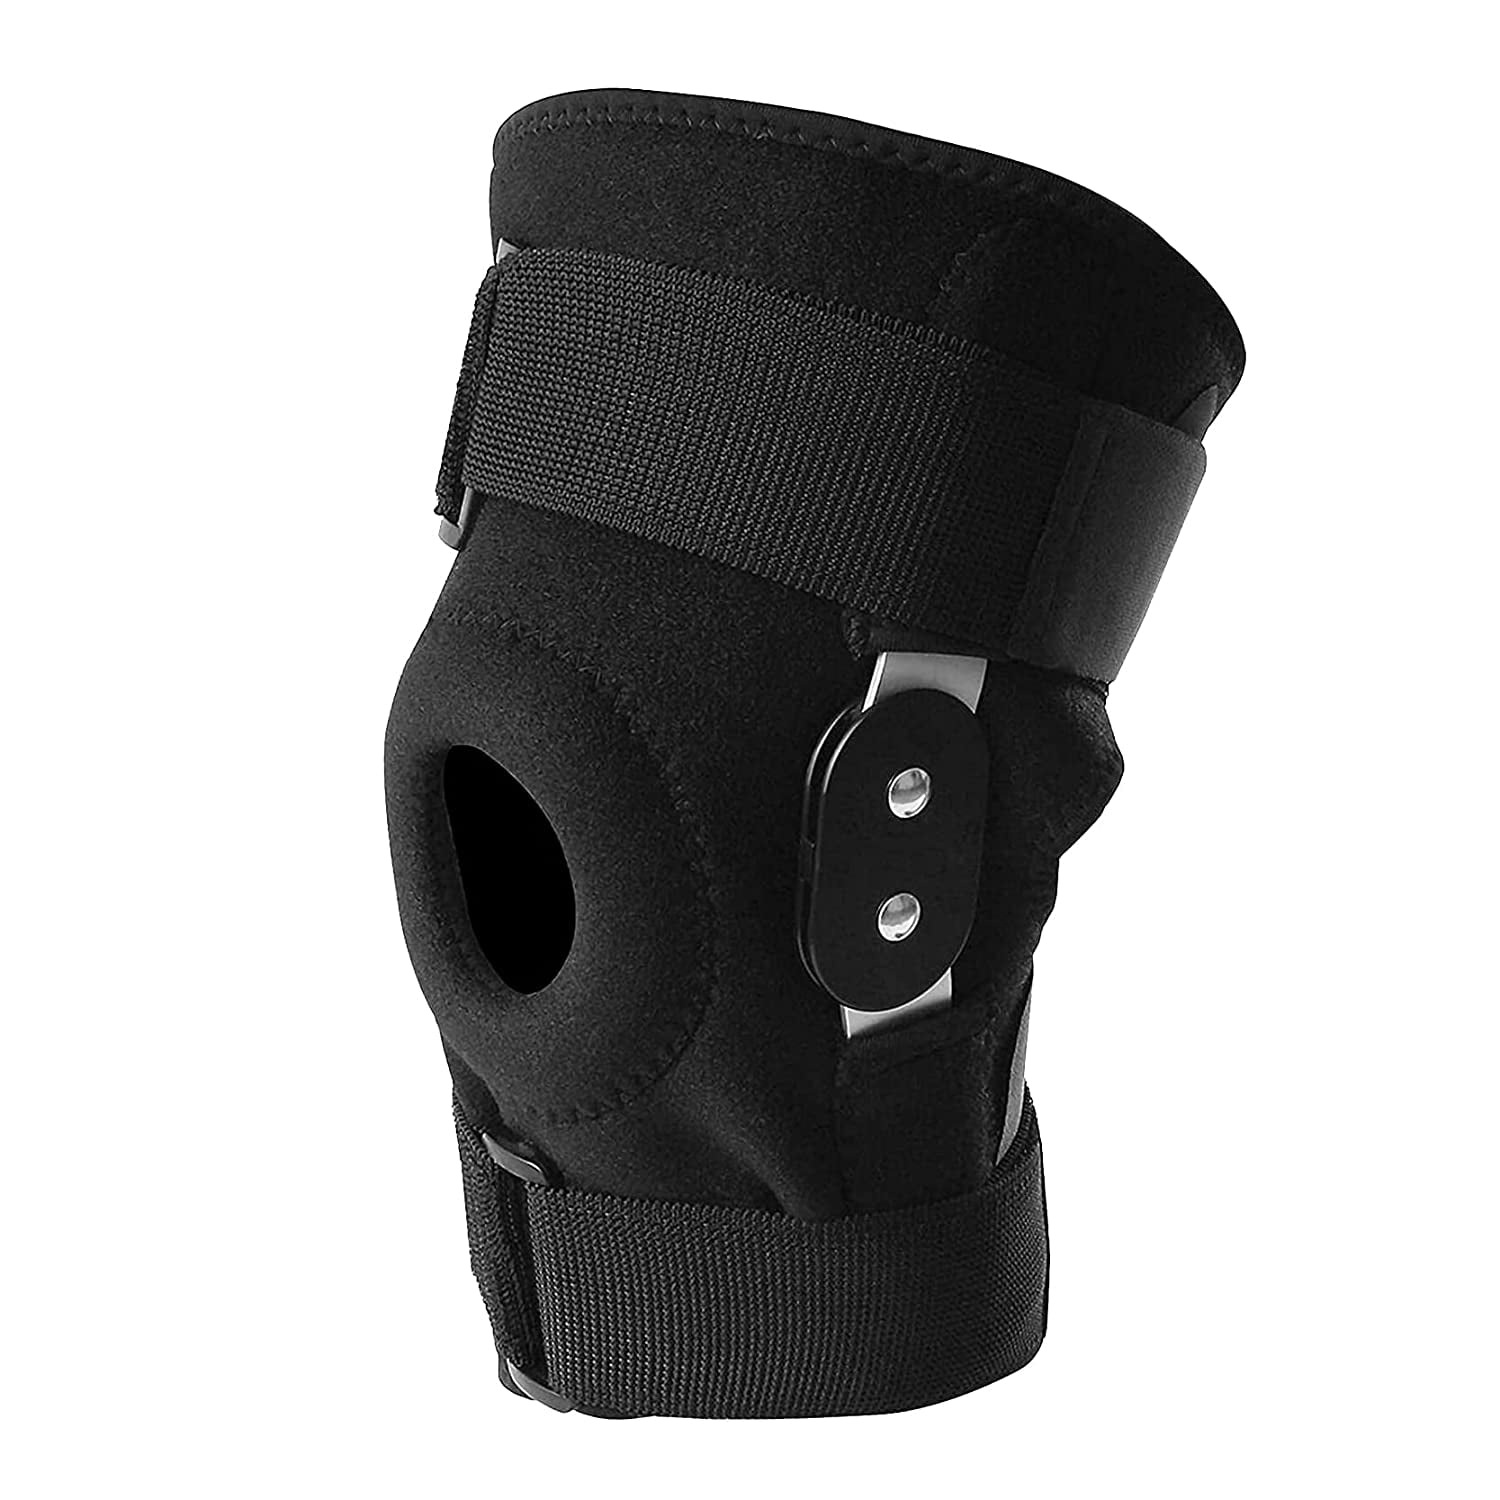 White/Charcoal Cliff Keen The Impact Adult Knee Pad 